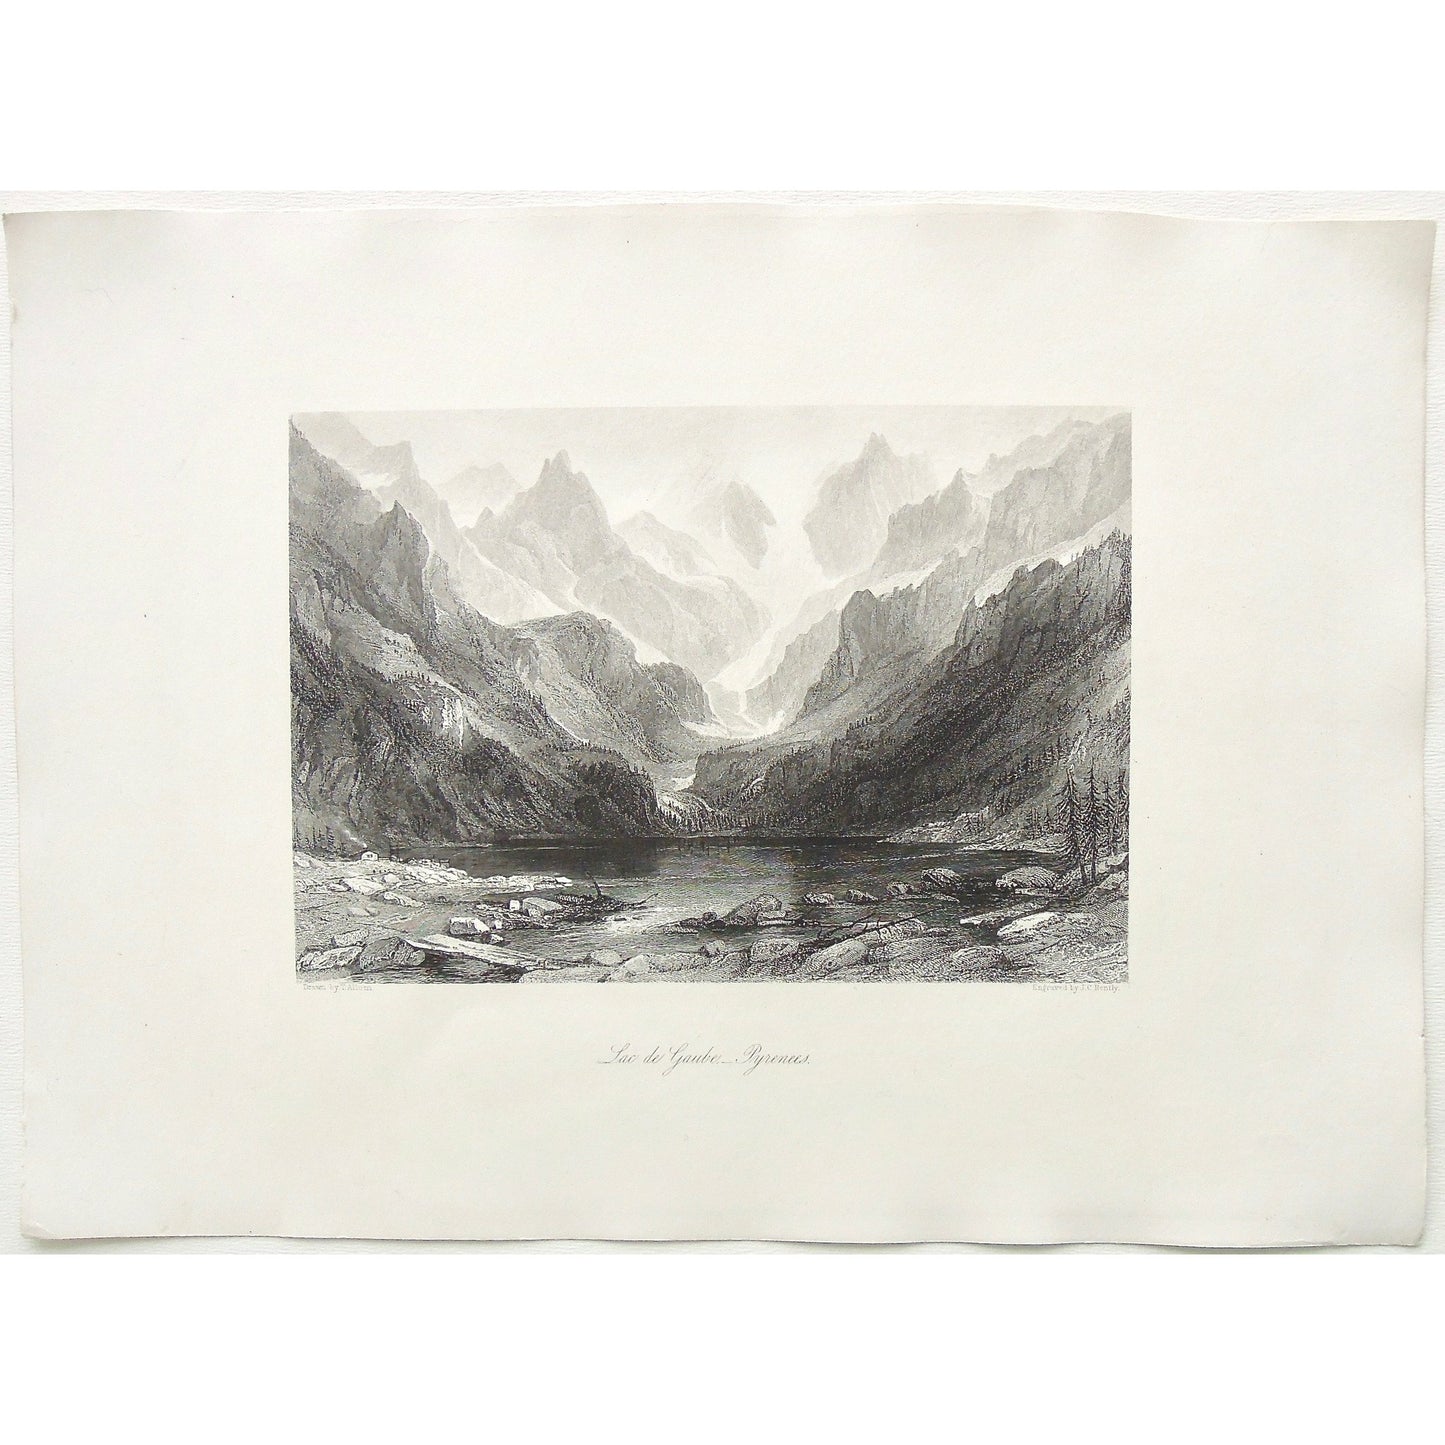 lac, lake, Pyrenees, Pyrenees Mountains, mountains, mountain range, valley, lakes, lac de Gaube, Gaube, France, Allom, Thomas Allom, T. Allom, Bently, J. C. Bently, Steel engraving, Europe Illustrated, London Printing and Publishing Company, London, 1876-79, 1876, 1879, Antique Print, Antique, Prints, Vintage, Vintage Art, Vintage Prints, Art, Wall art, Decor, wall decor, design, engraving, original, authentic, Collectors, Collectable, rare books, rare, book, printmaking, print, printers, Sherer, John Shere